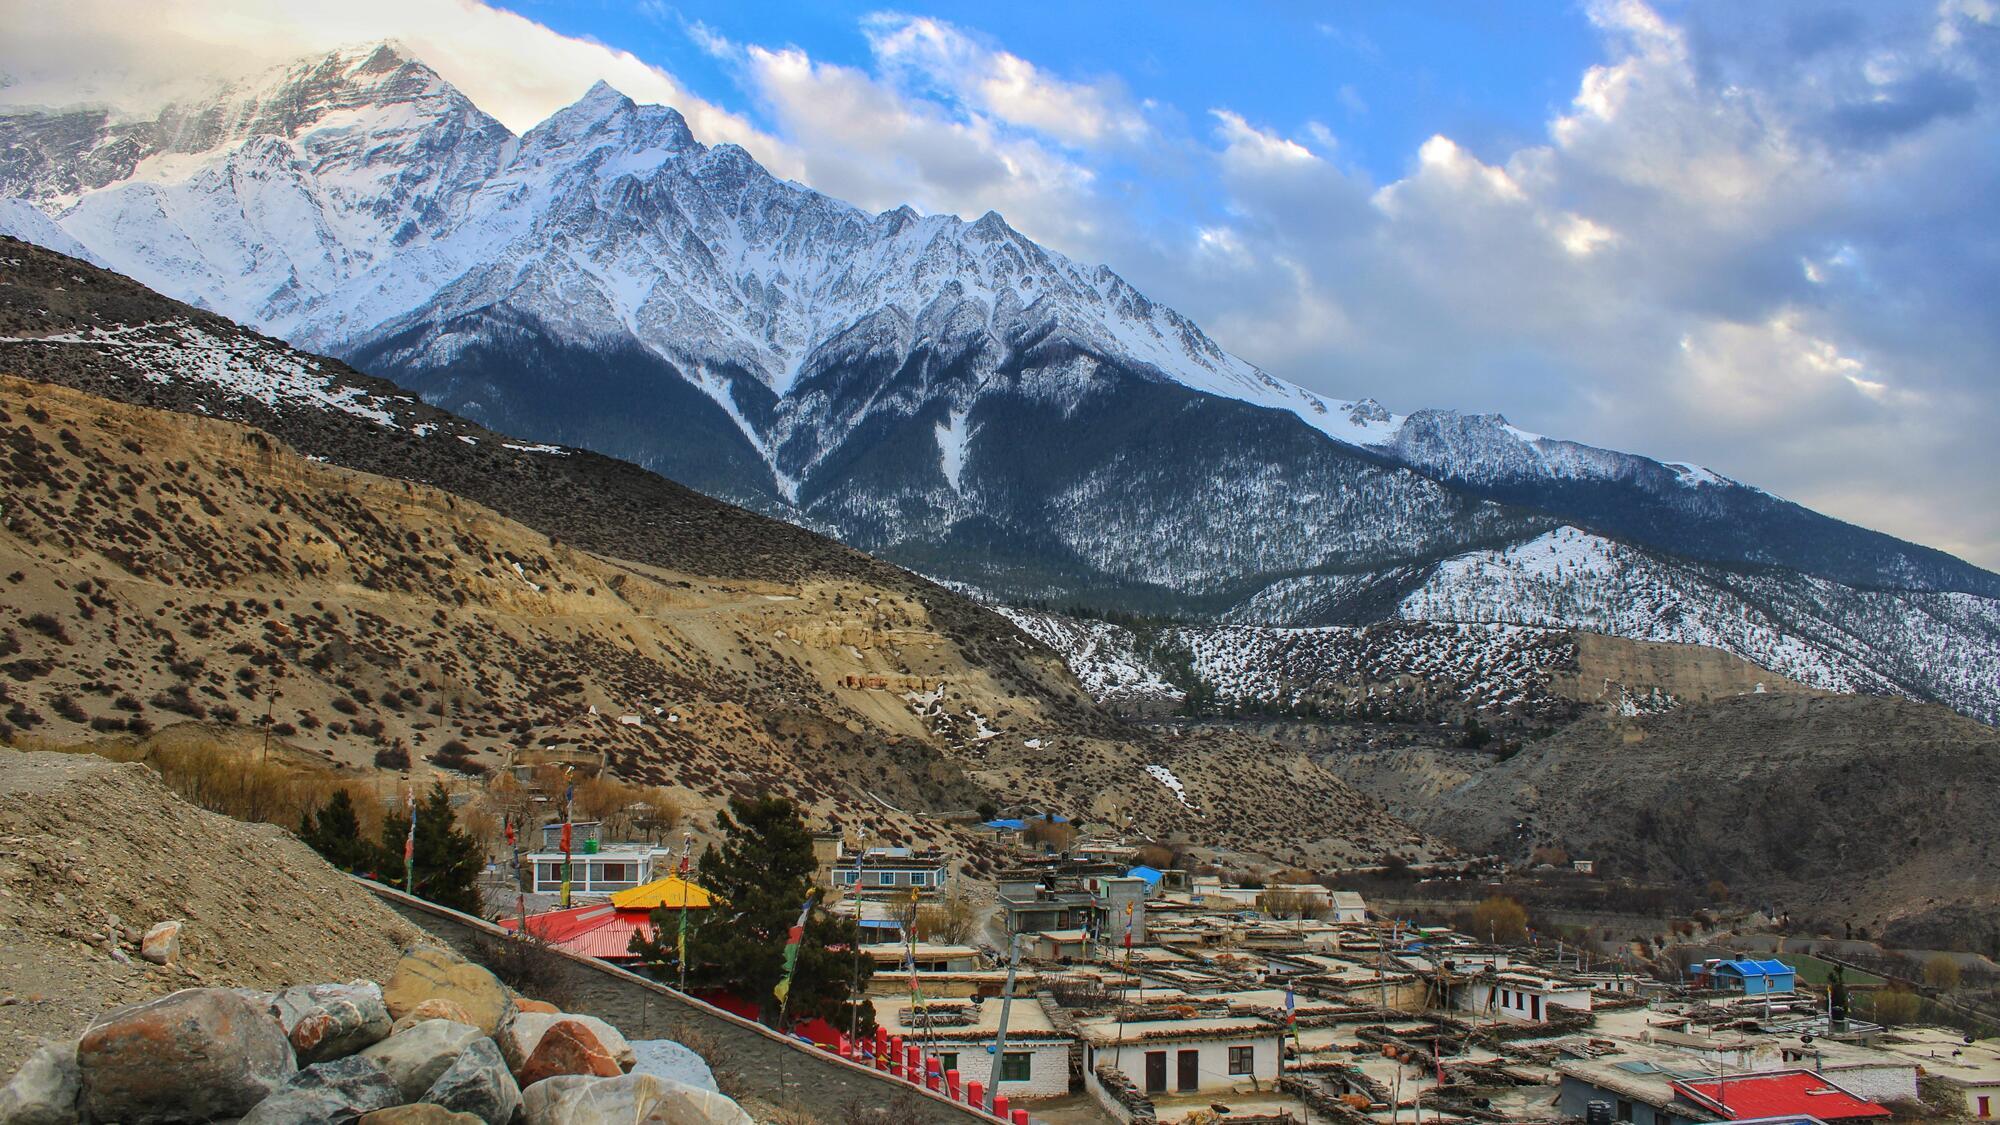 A settlement in Nepal beneath a snow-topped mountain range